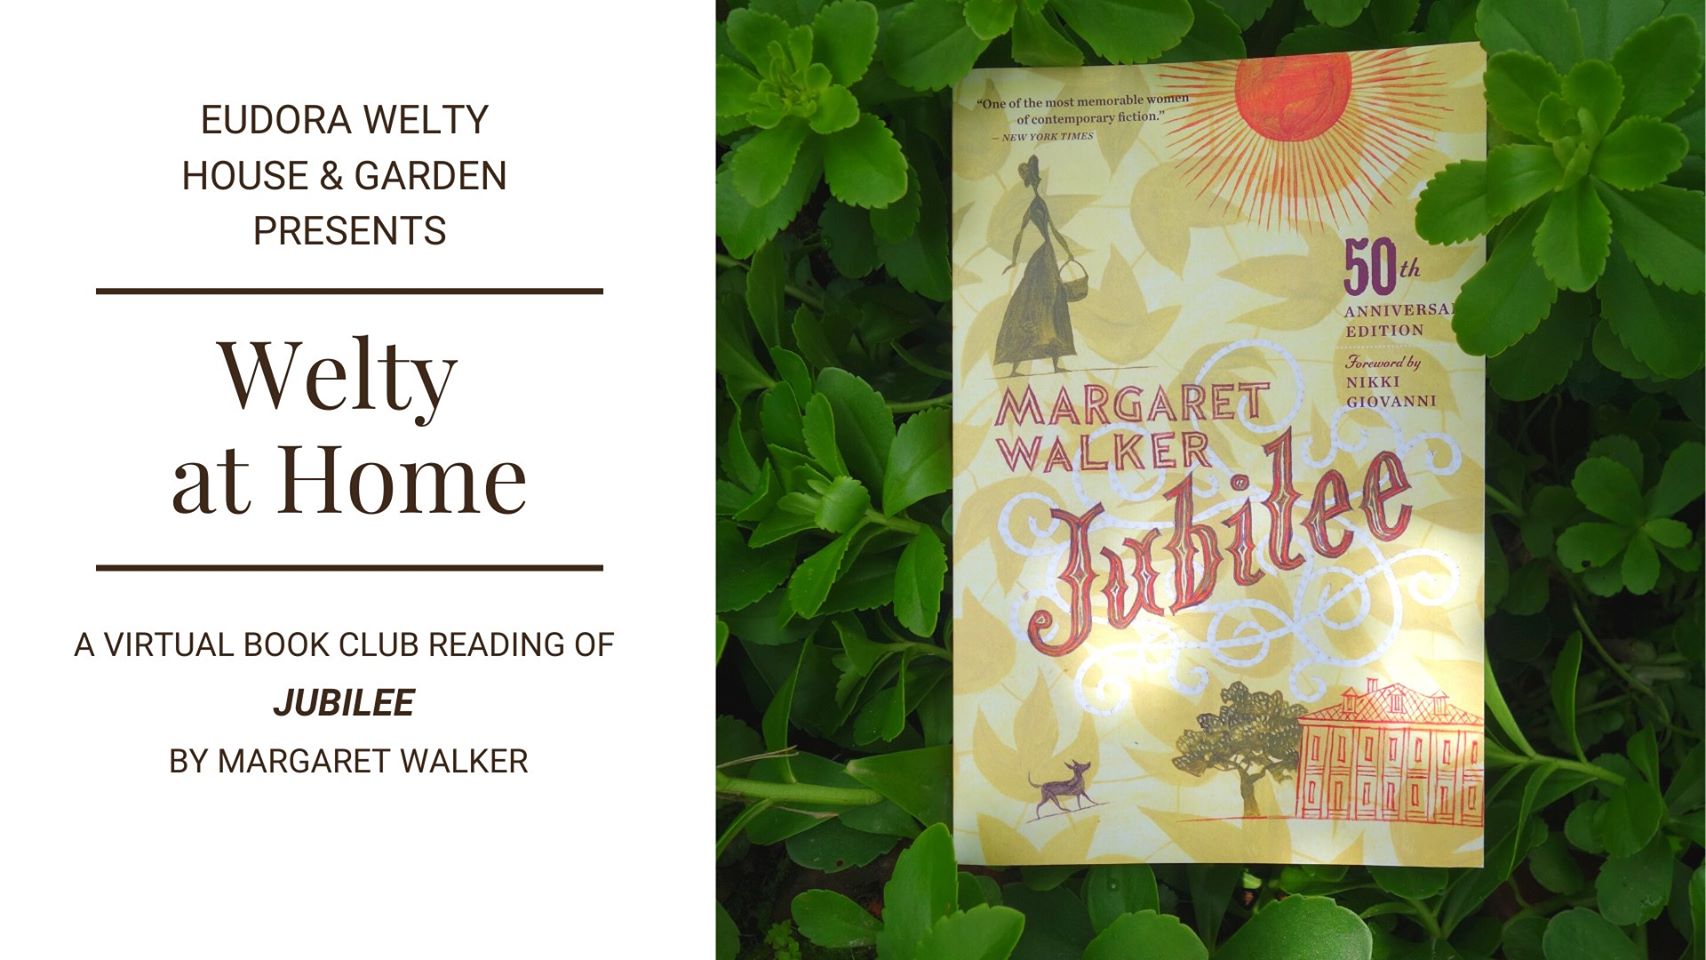 Cover of Jubilee book by Margaret Walker framed by greenery next to text graphic of book club details